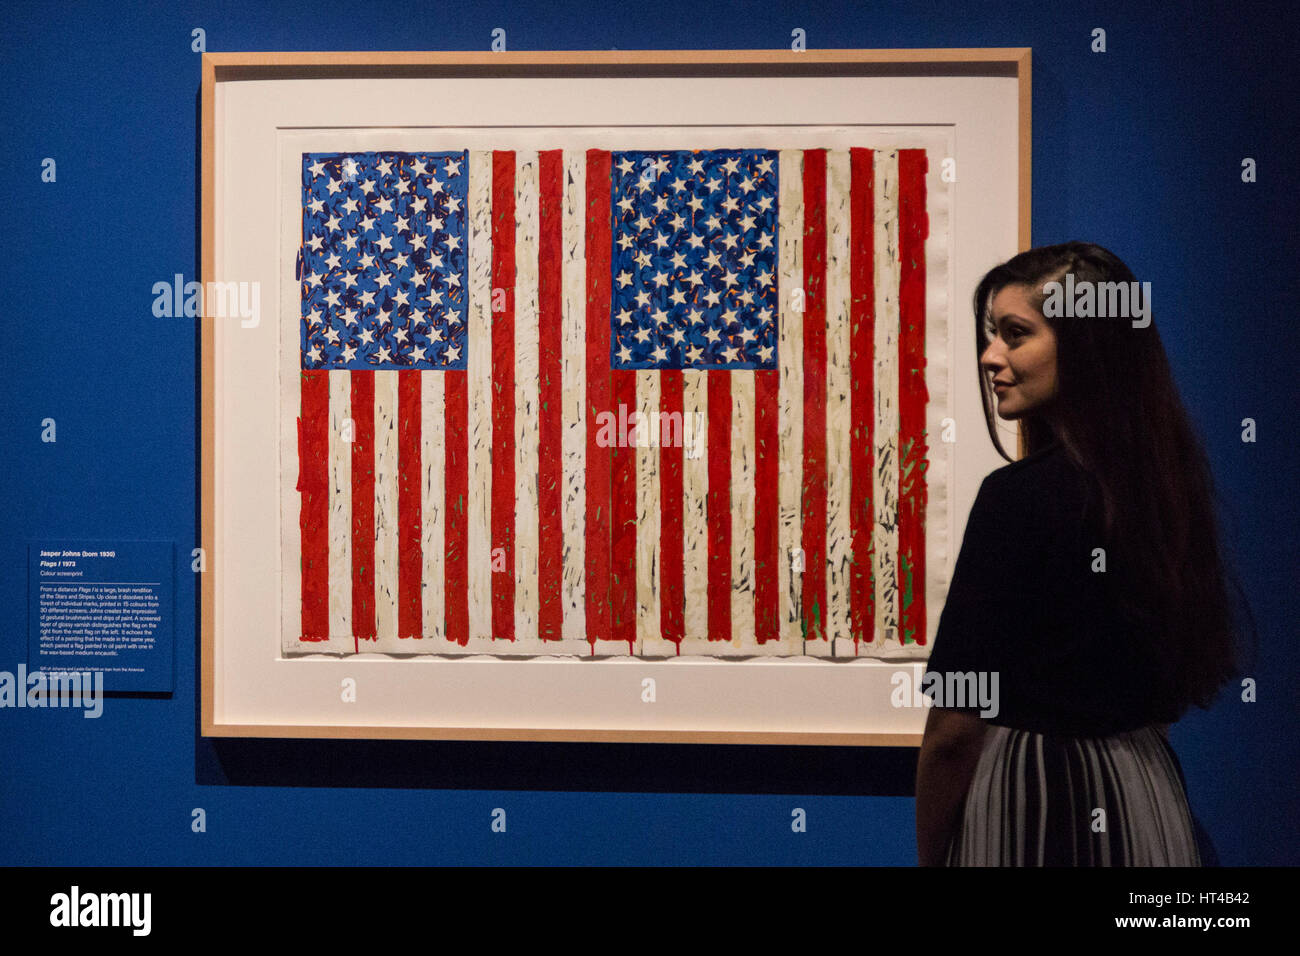 London, UK. 6 March 2017. Flags, 1973, by Jasper Johns. The exhibition 'The American Dream: pop to the present' opens at the British Museum on 9 March and runs until 18 June 2017. The American Dream is the UK's first major exhibition to chart modern and contemporary American printmaking and has more than 200 works by 70 artists on display. it is sponsored by Morgan Stanley and supported by the Terra Foundation for American Art. Stock Photo